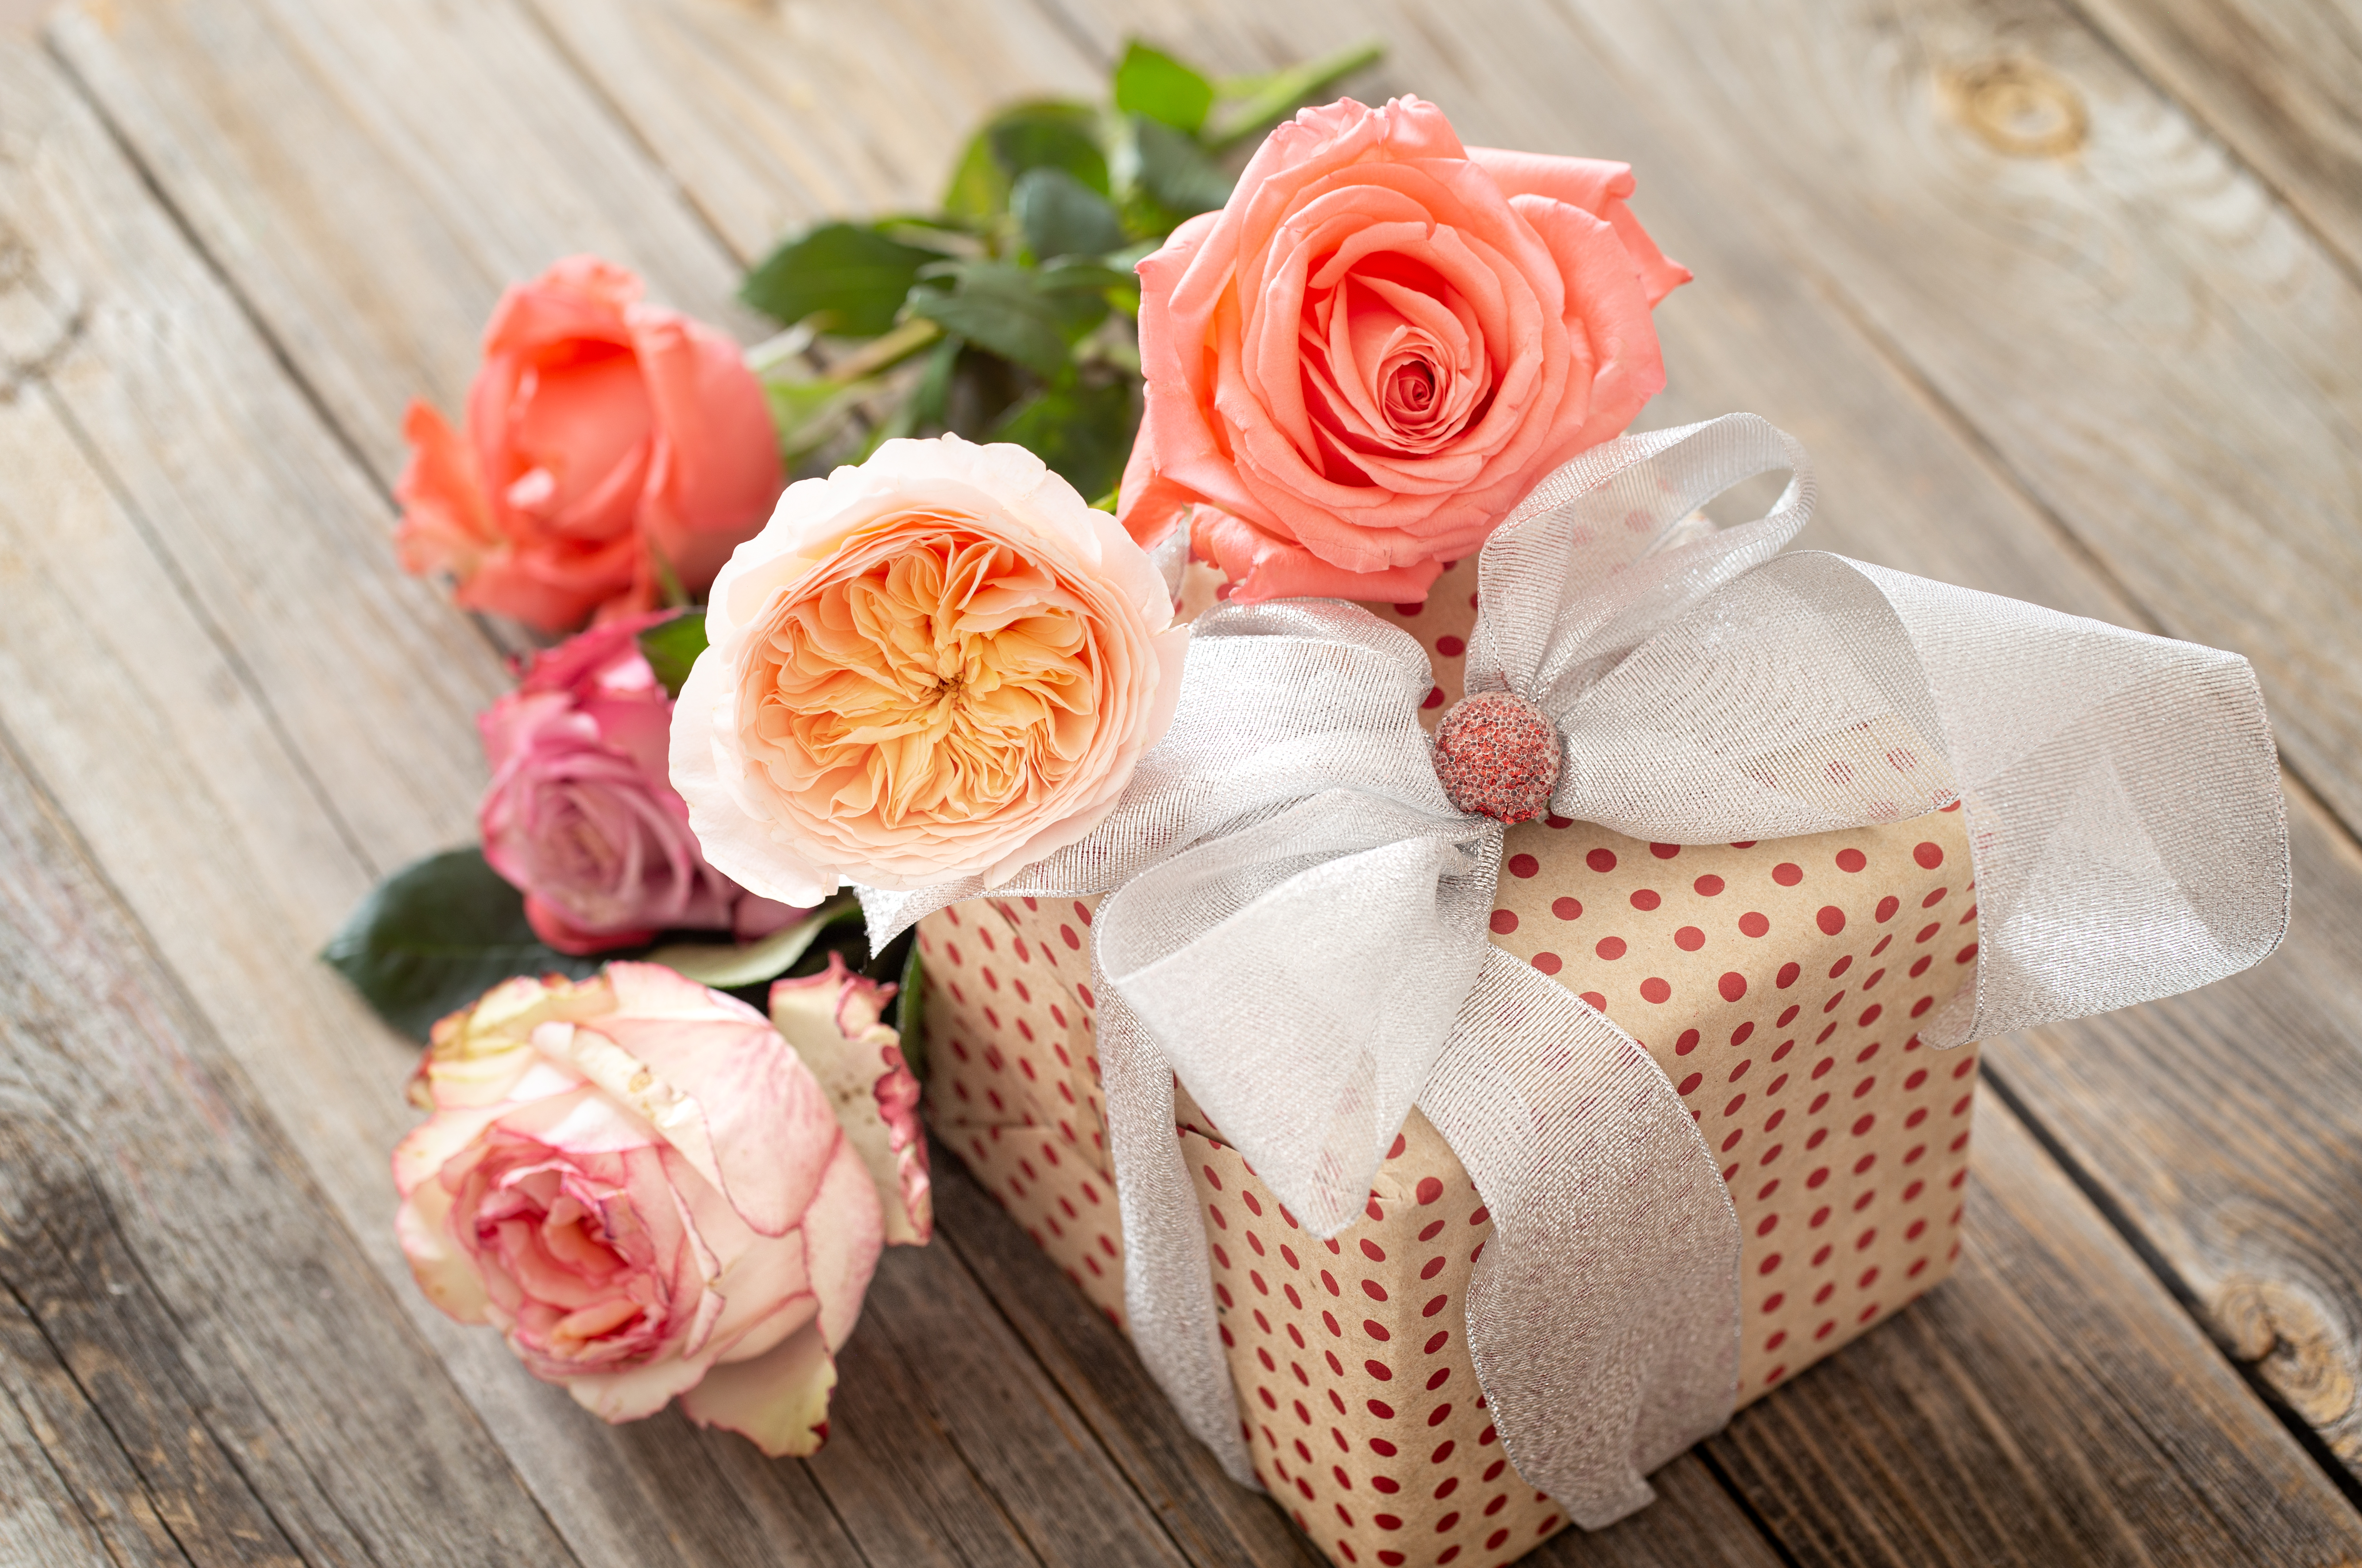 beautifully-wrapped-gift-and-a-bouquet-of-roses-on-a-blurred-wooden-table